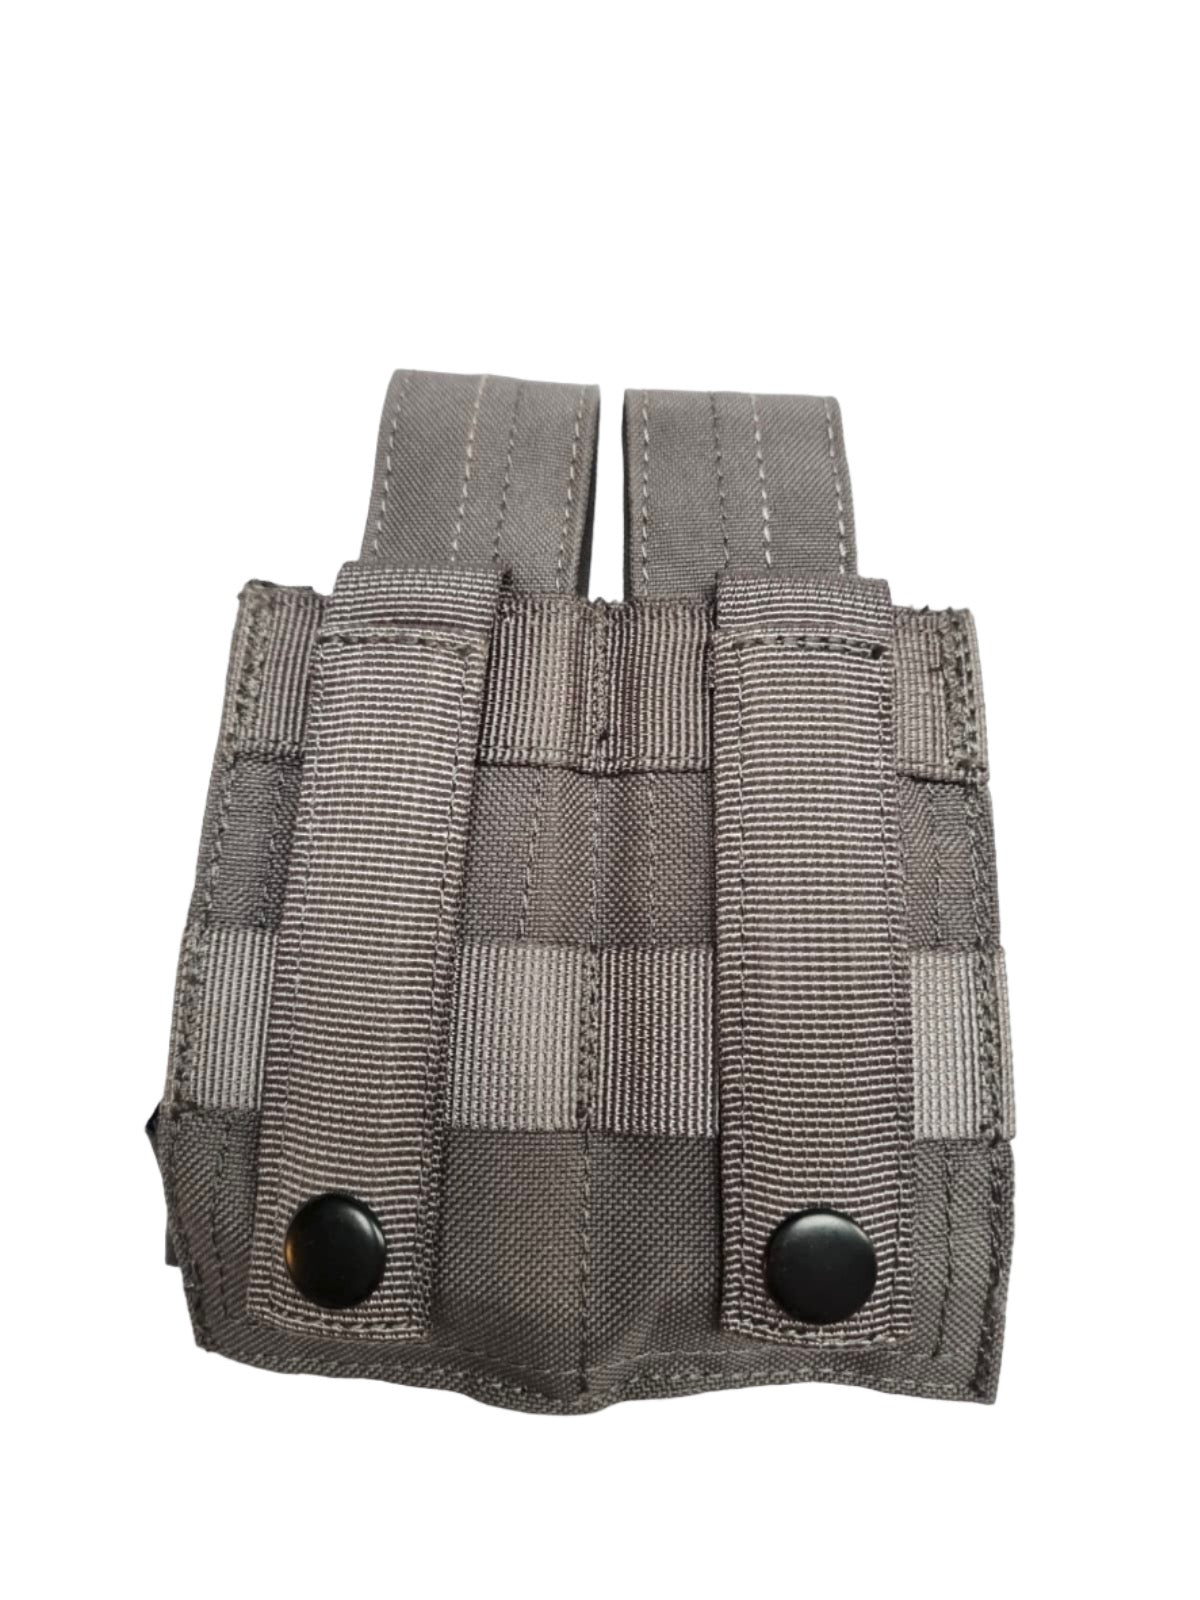 SHE-23030 GRIPTAC DOUBLE PISTOL MAG  POUCH GREY